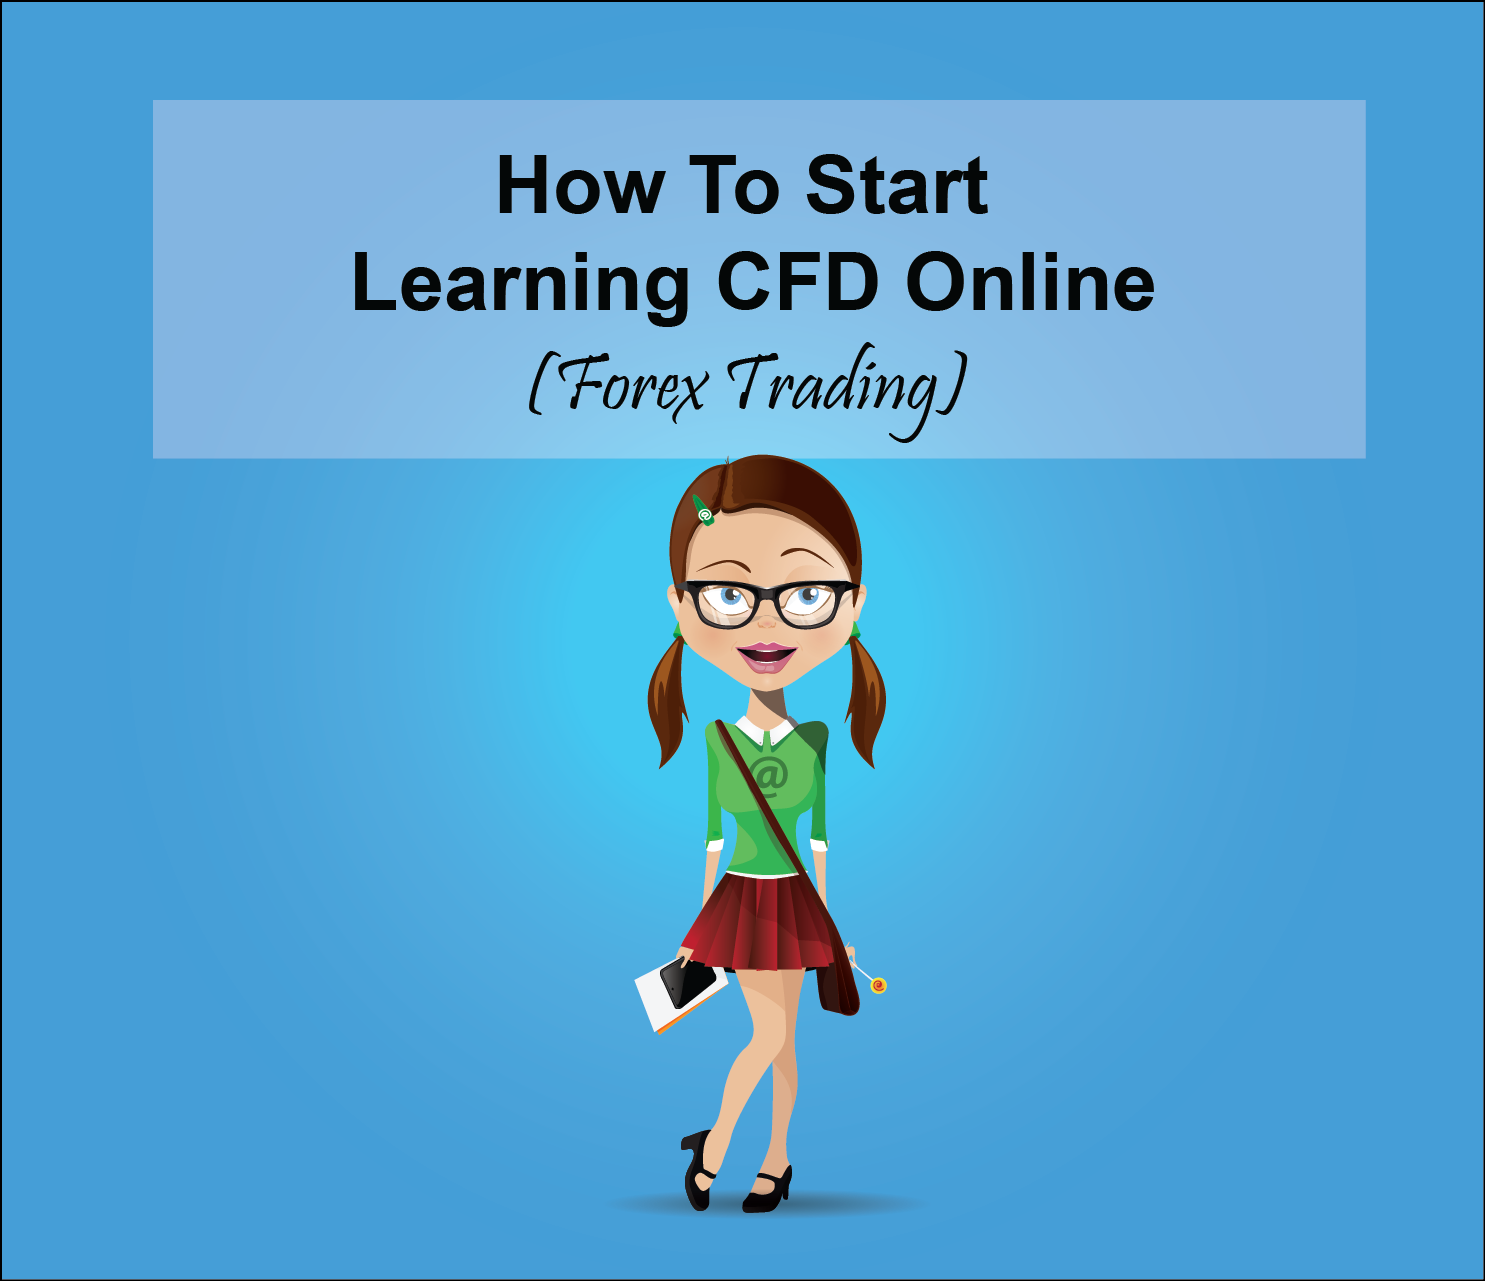 Cfd forex